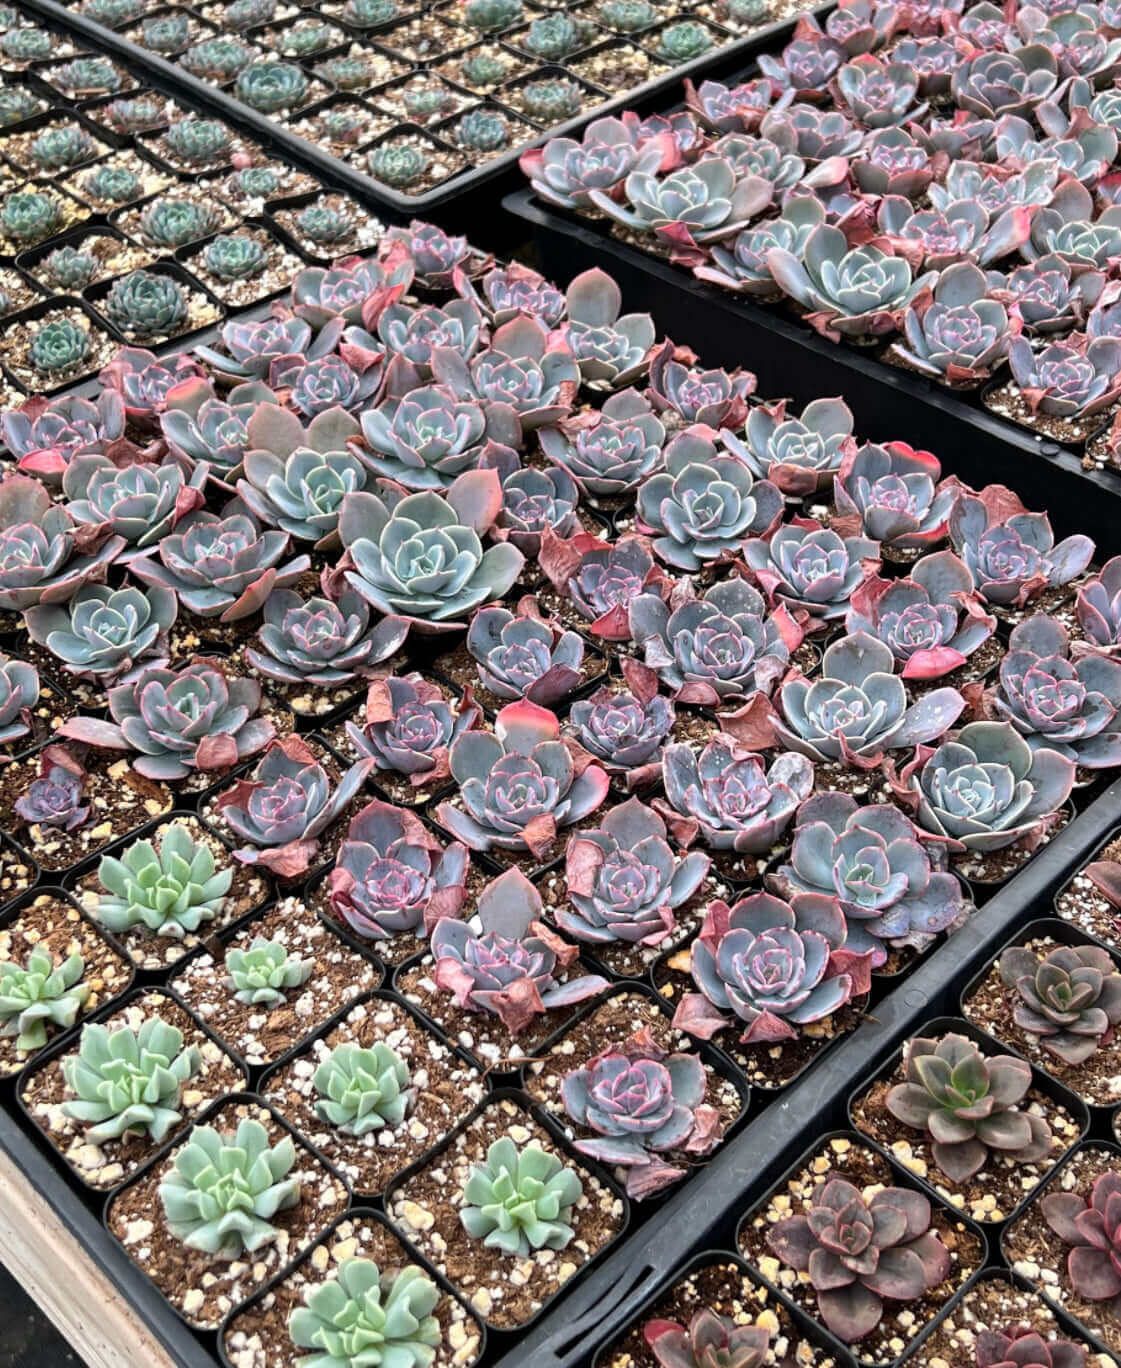 Group of colorful 2-inch succulents, perfect for adding a splash of color to small spaces.